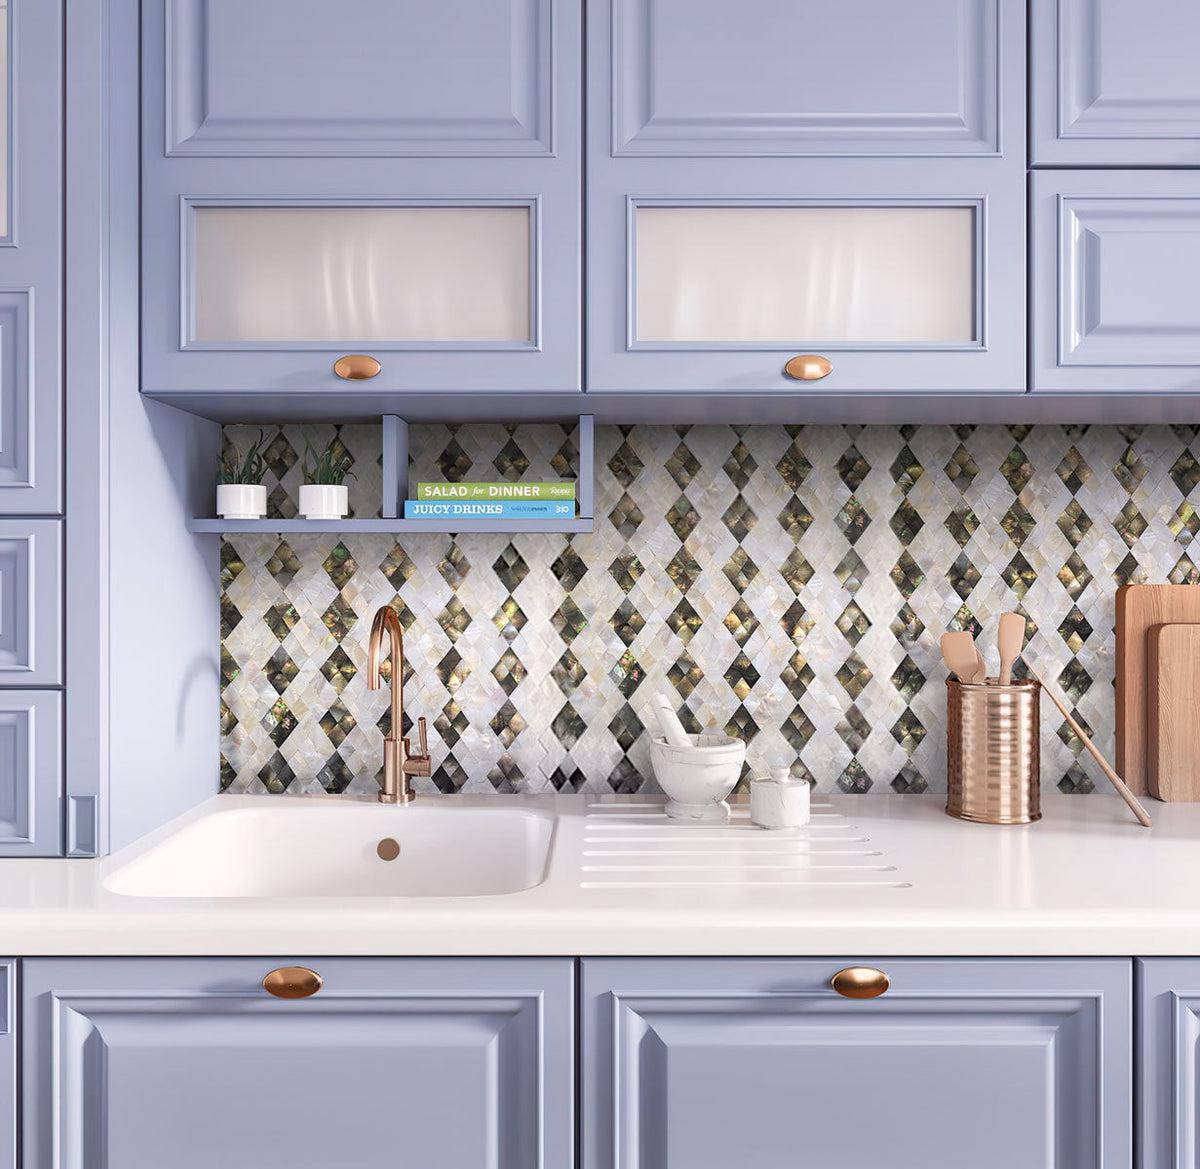 Mother Of Pearl Diamonds Mosaic Tile backsplash in Cornflower blue kitchen with copper fittings